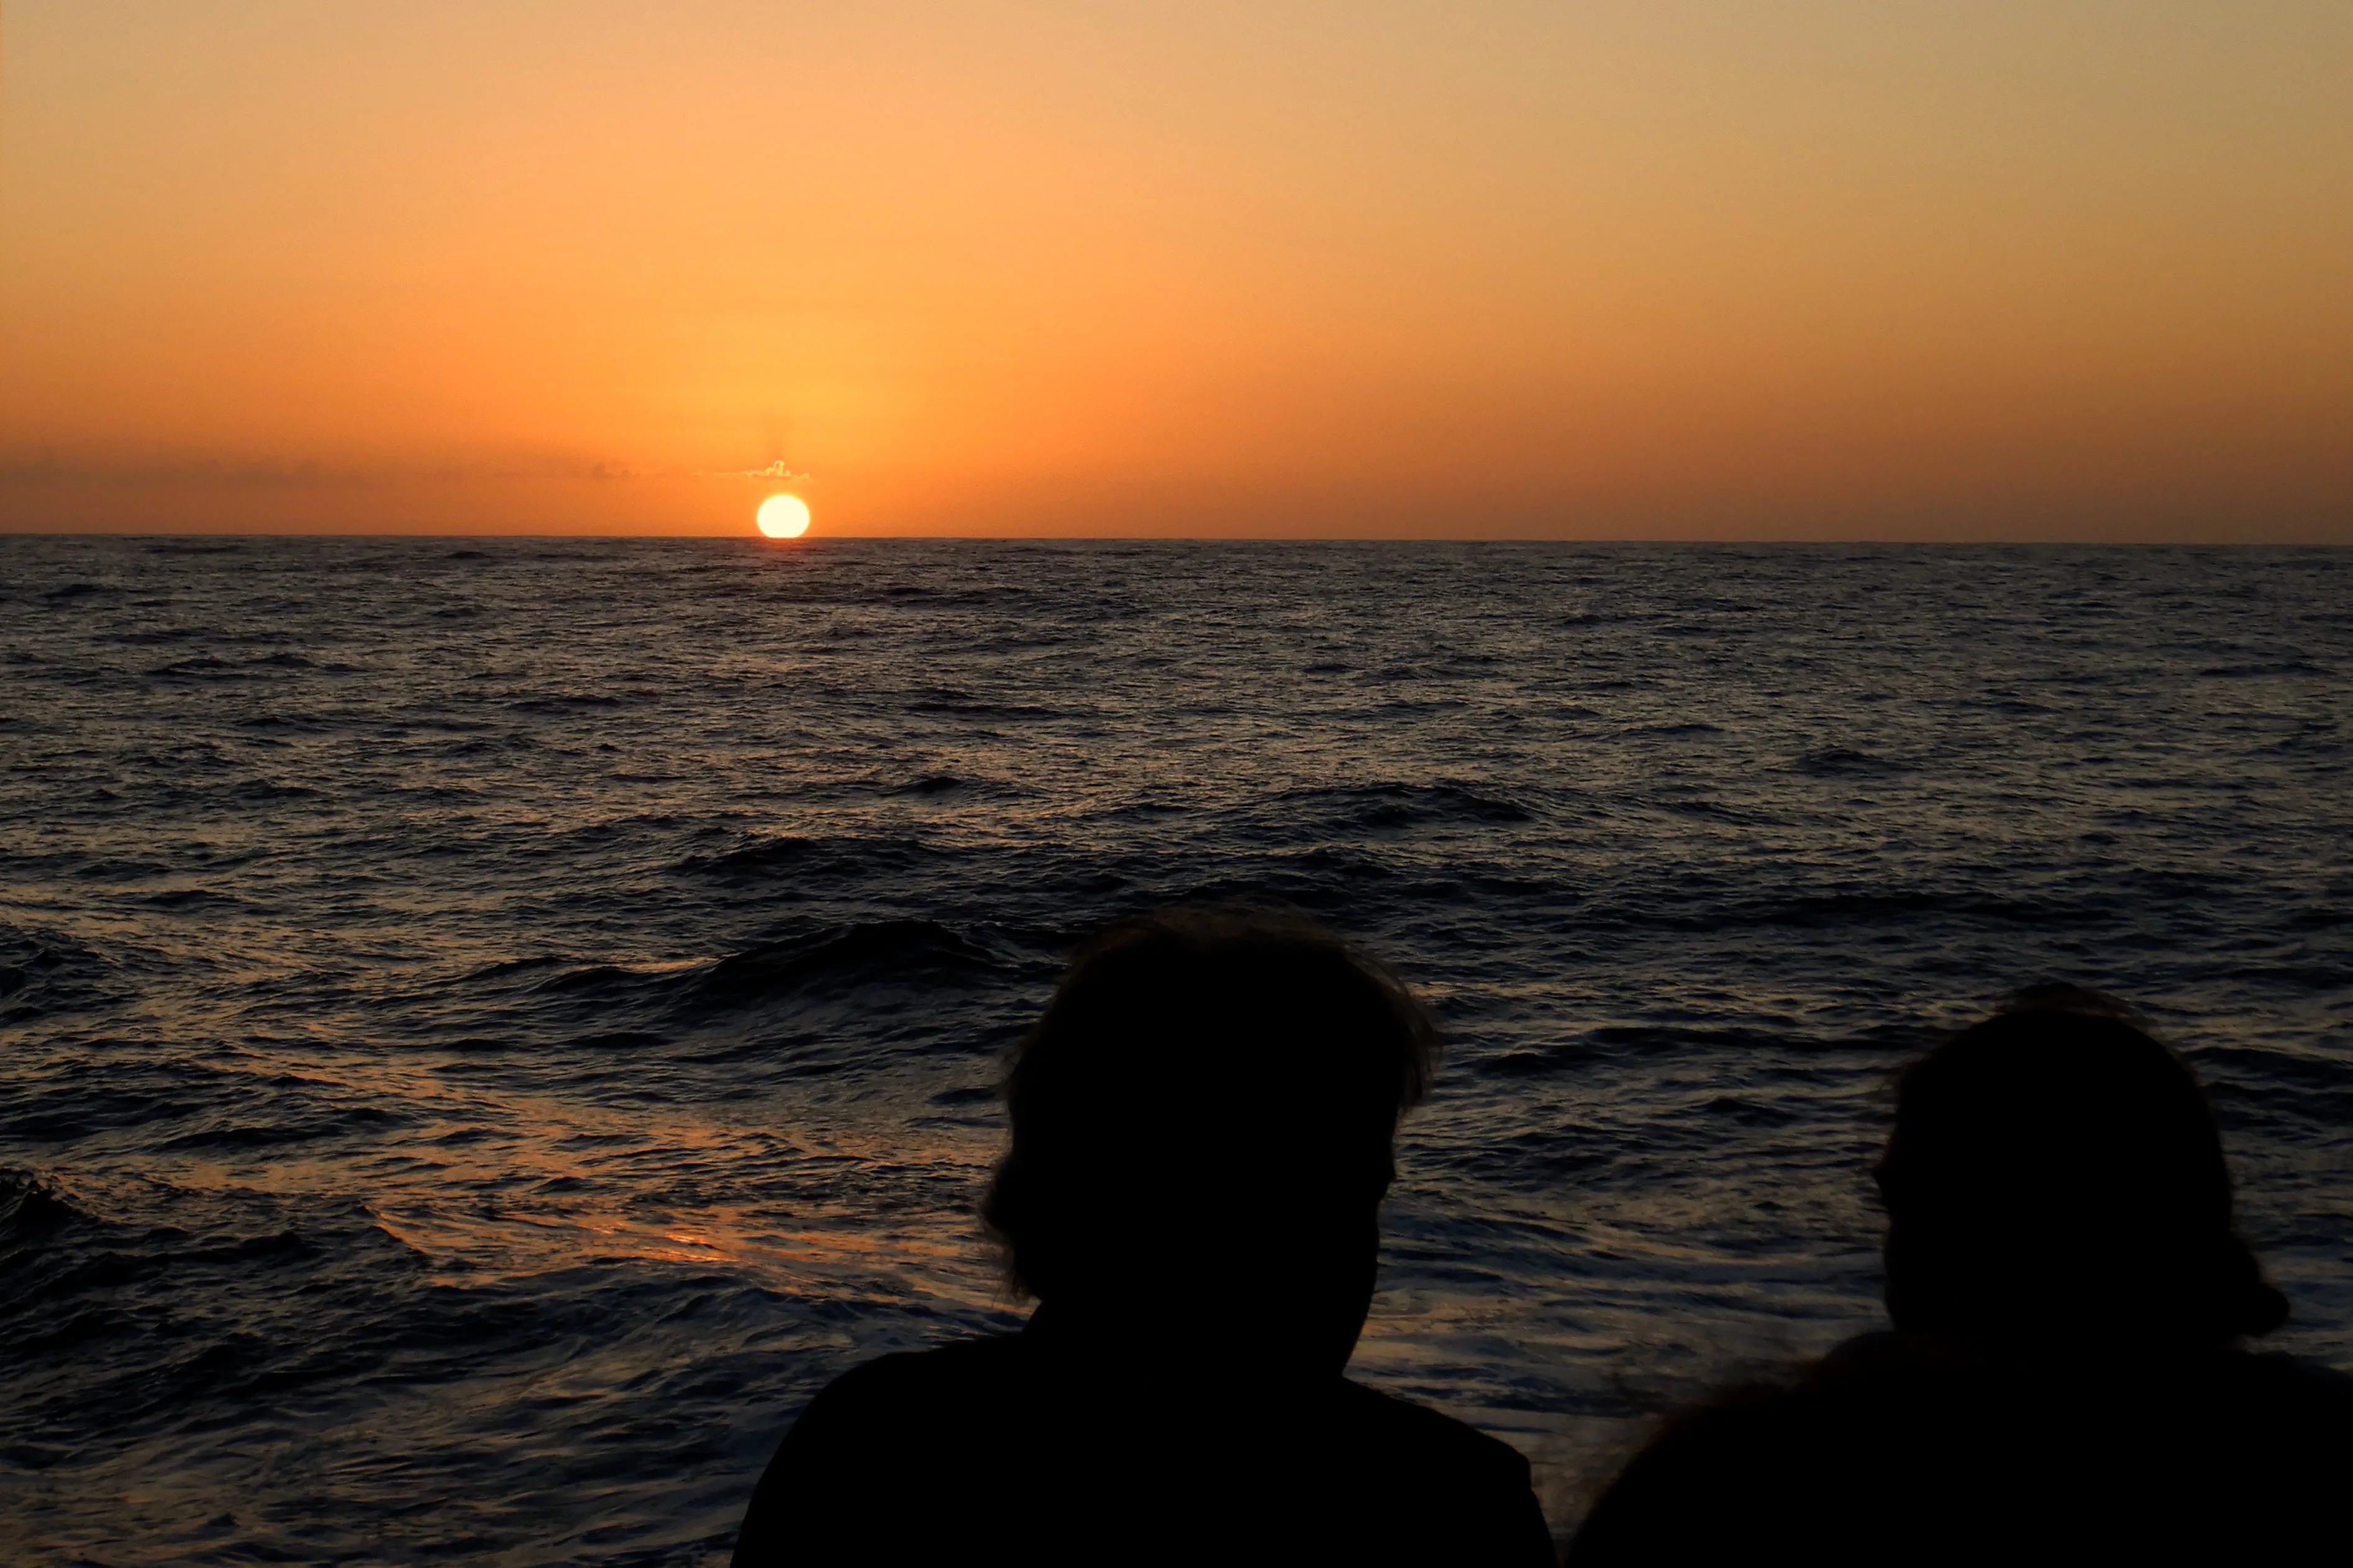 A sunset at sea with the silhouettes of two people watching